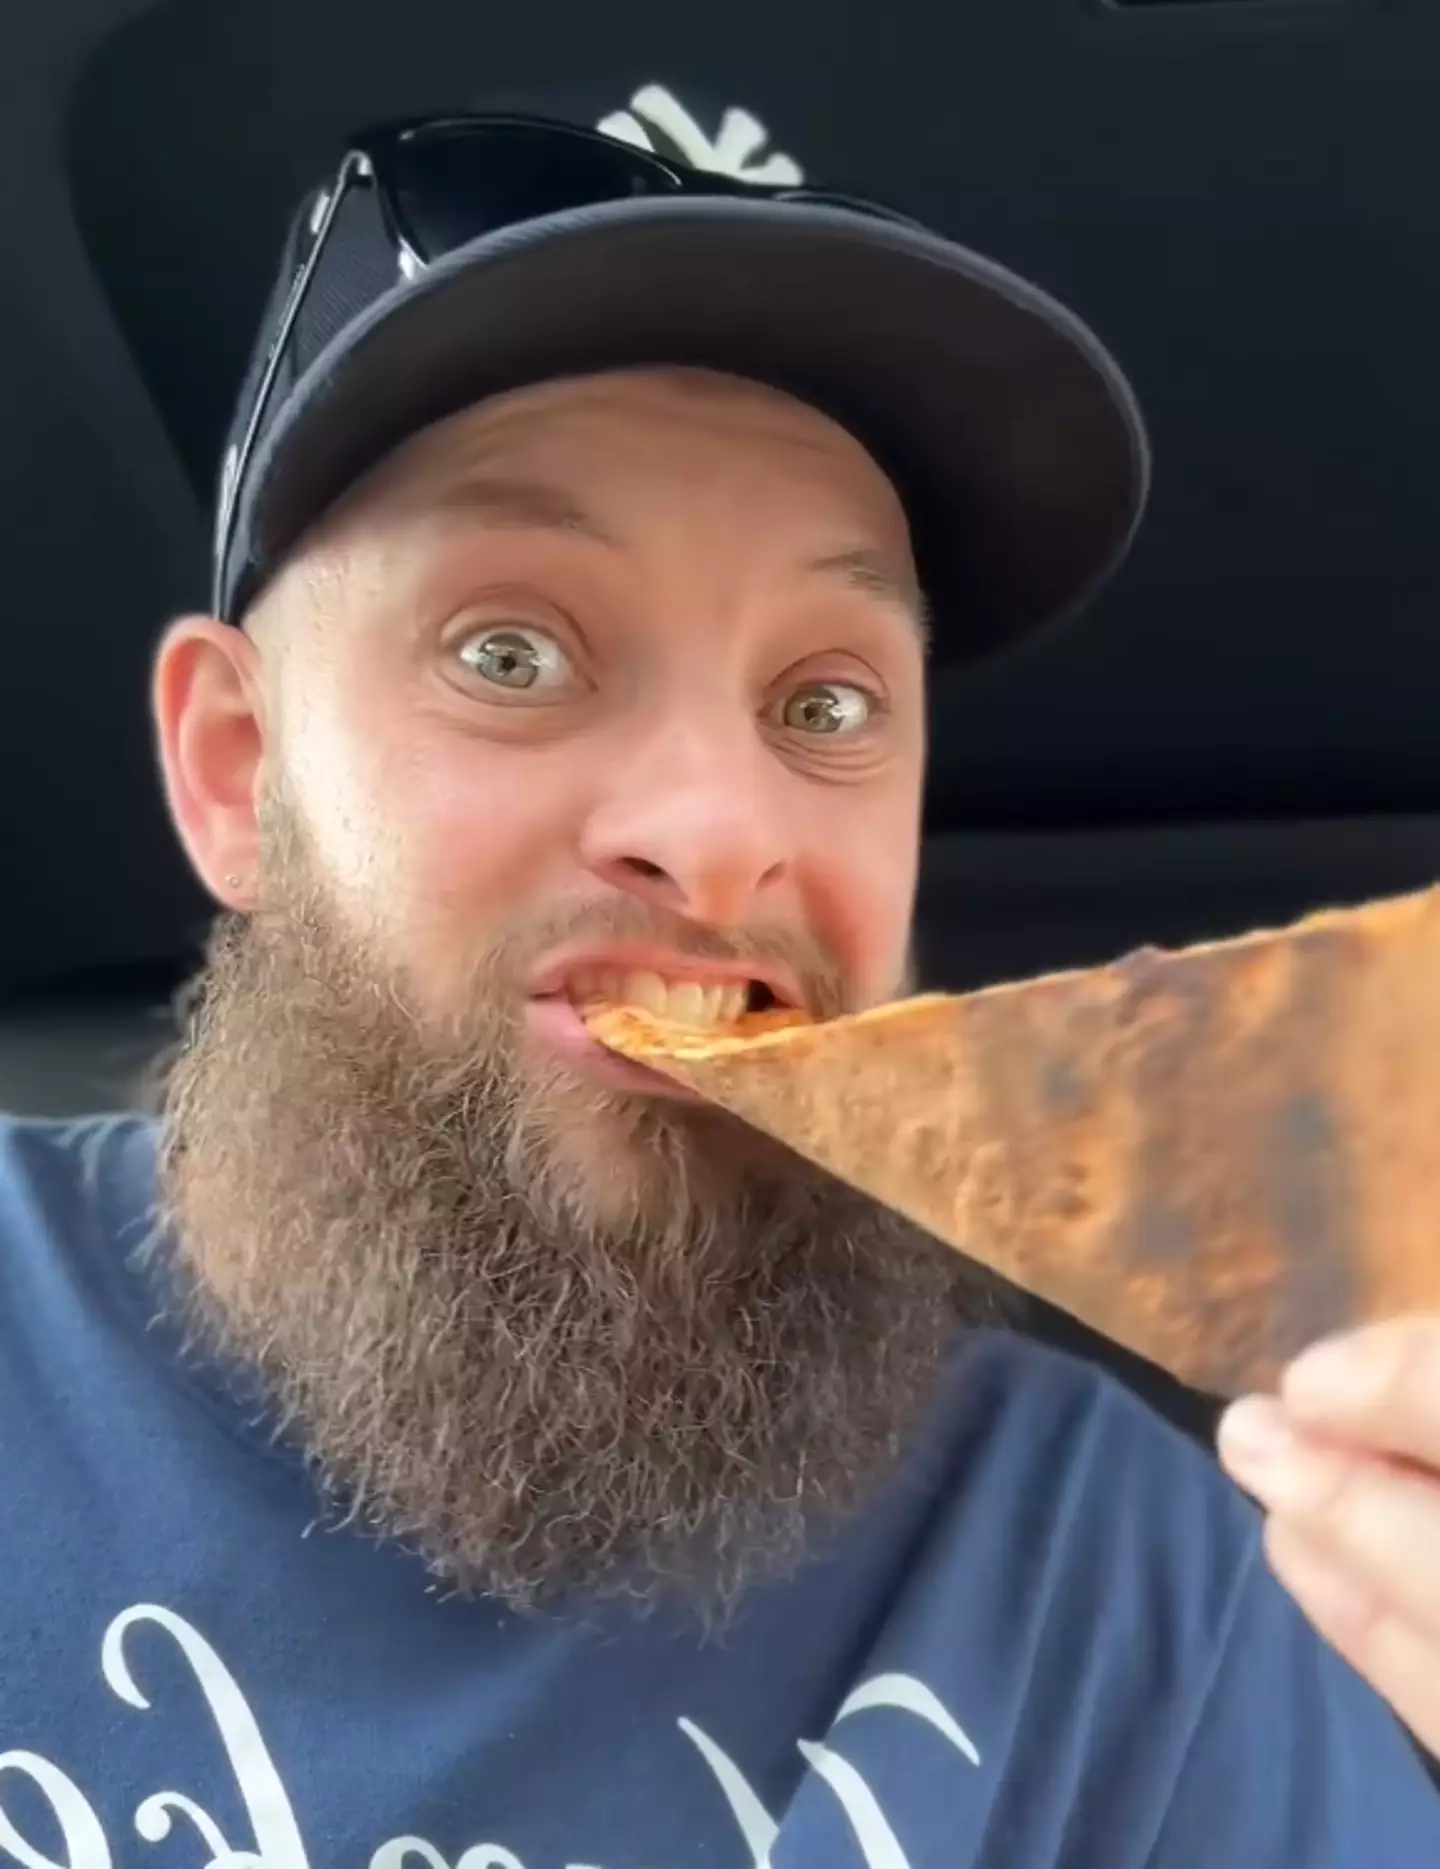 Kenny Wildes has 'eaten pizza every day for six years'. (Instagram/@ctpizzaman)